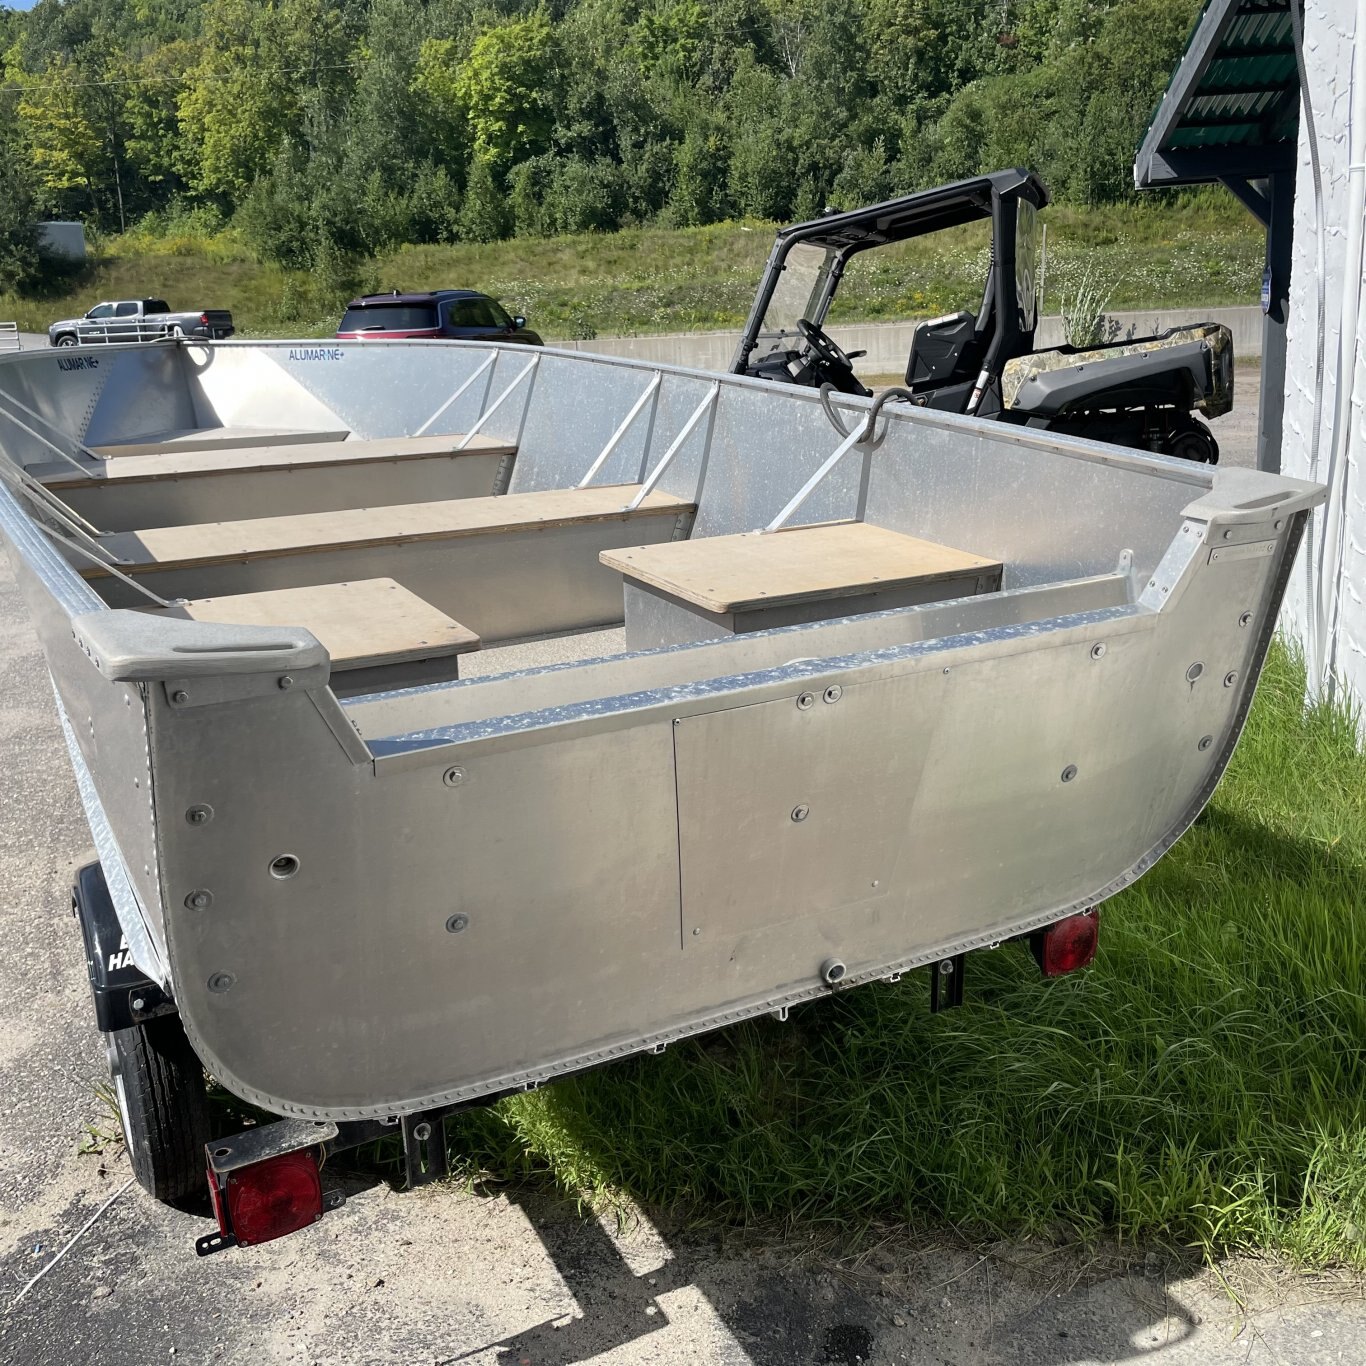 Alumarine HD 16 Commercial RSB W/Yamaha F25 Electric/Manual Start and Easy Hauler Trailer